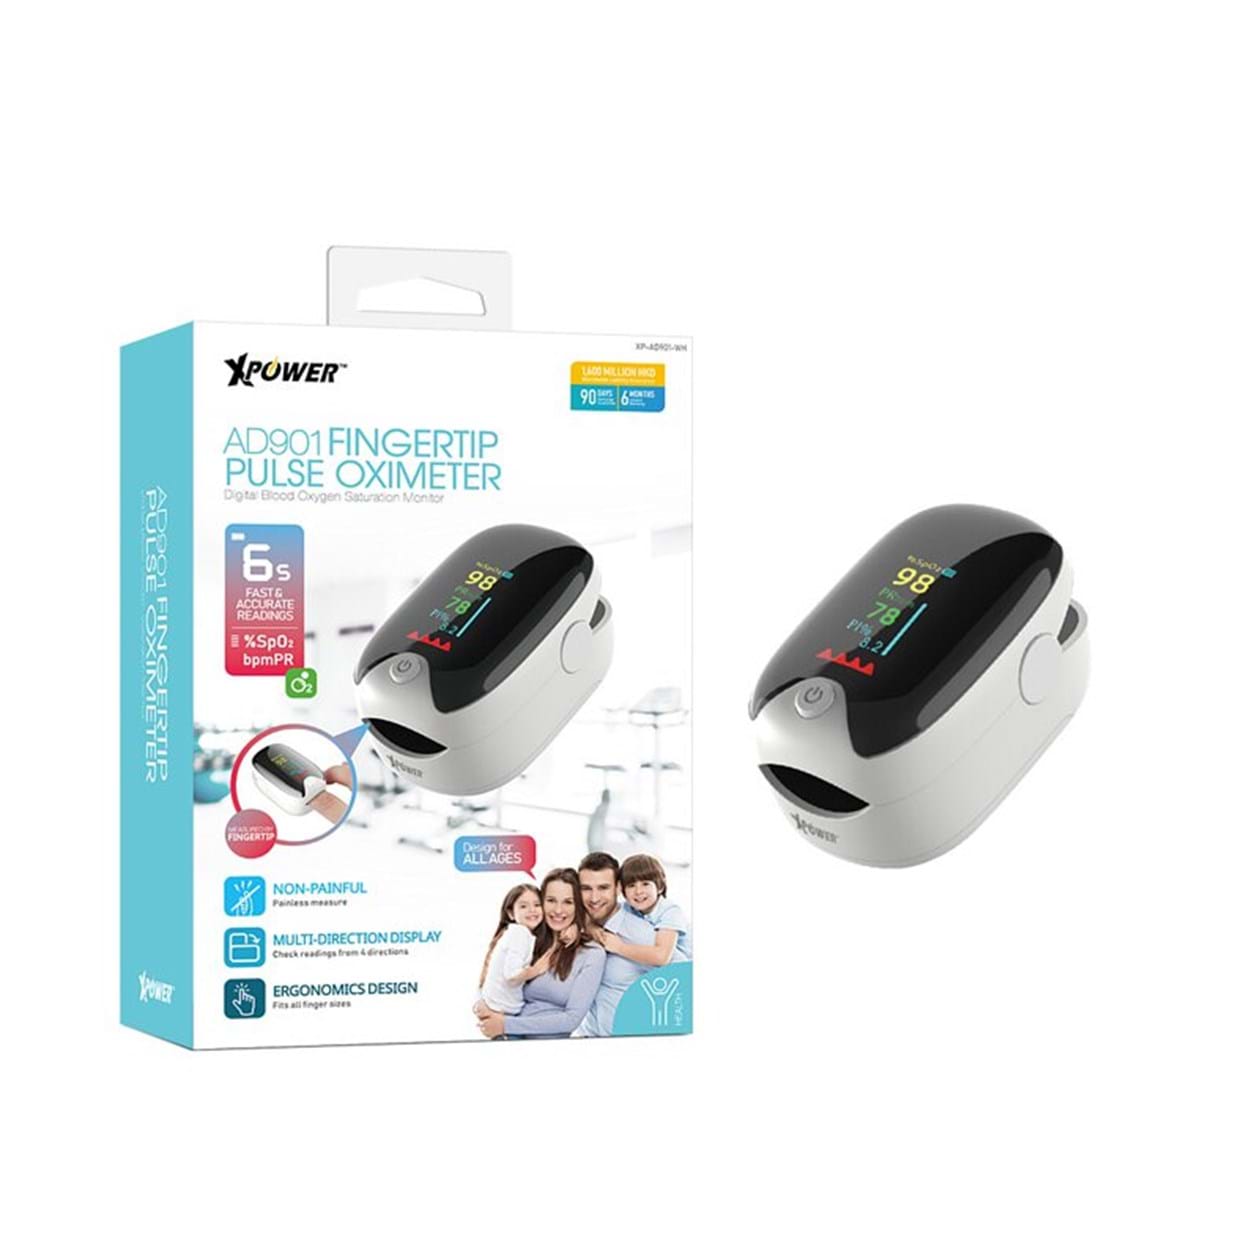 XPower AD901 Fingertip Pulse Oximeter (Delivery Product)